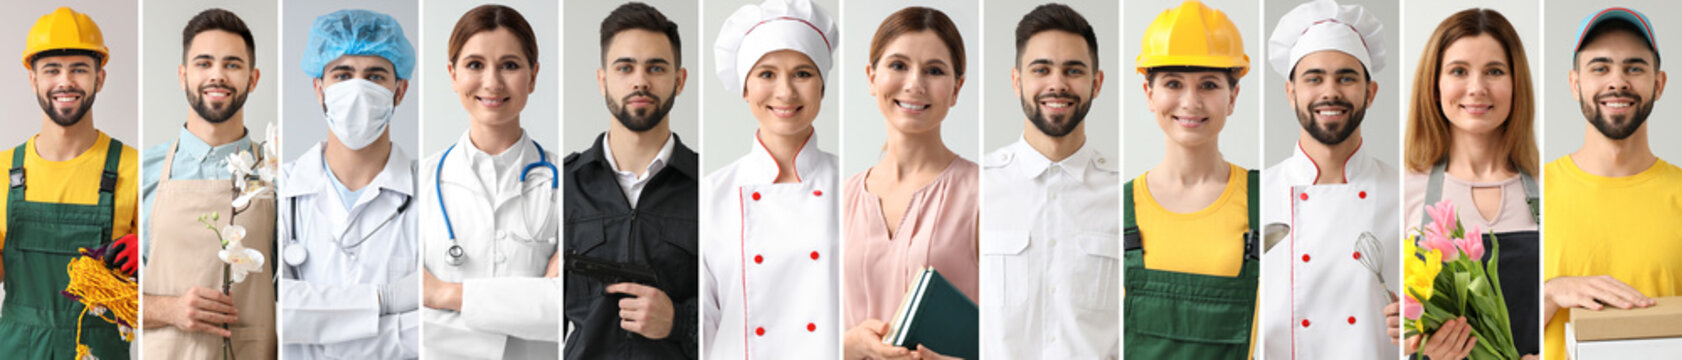 Collage with people in uniforms of different professions